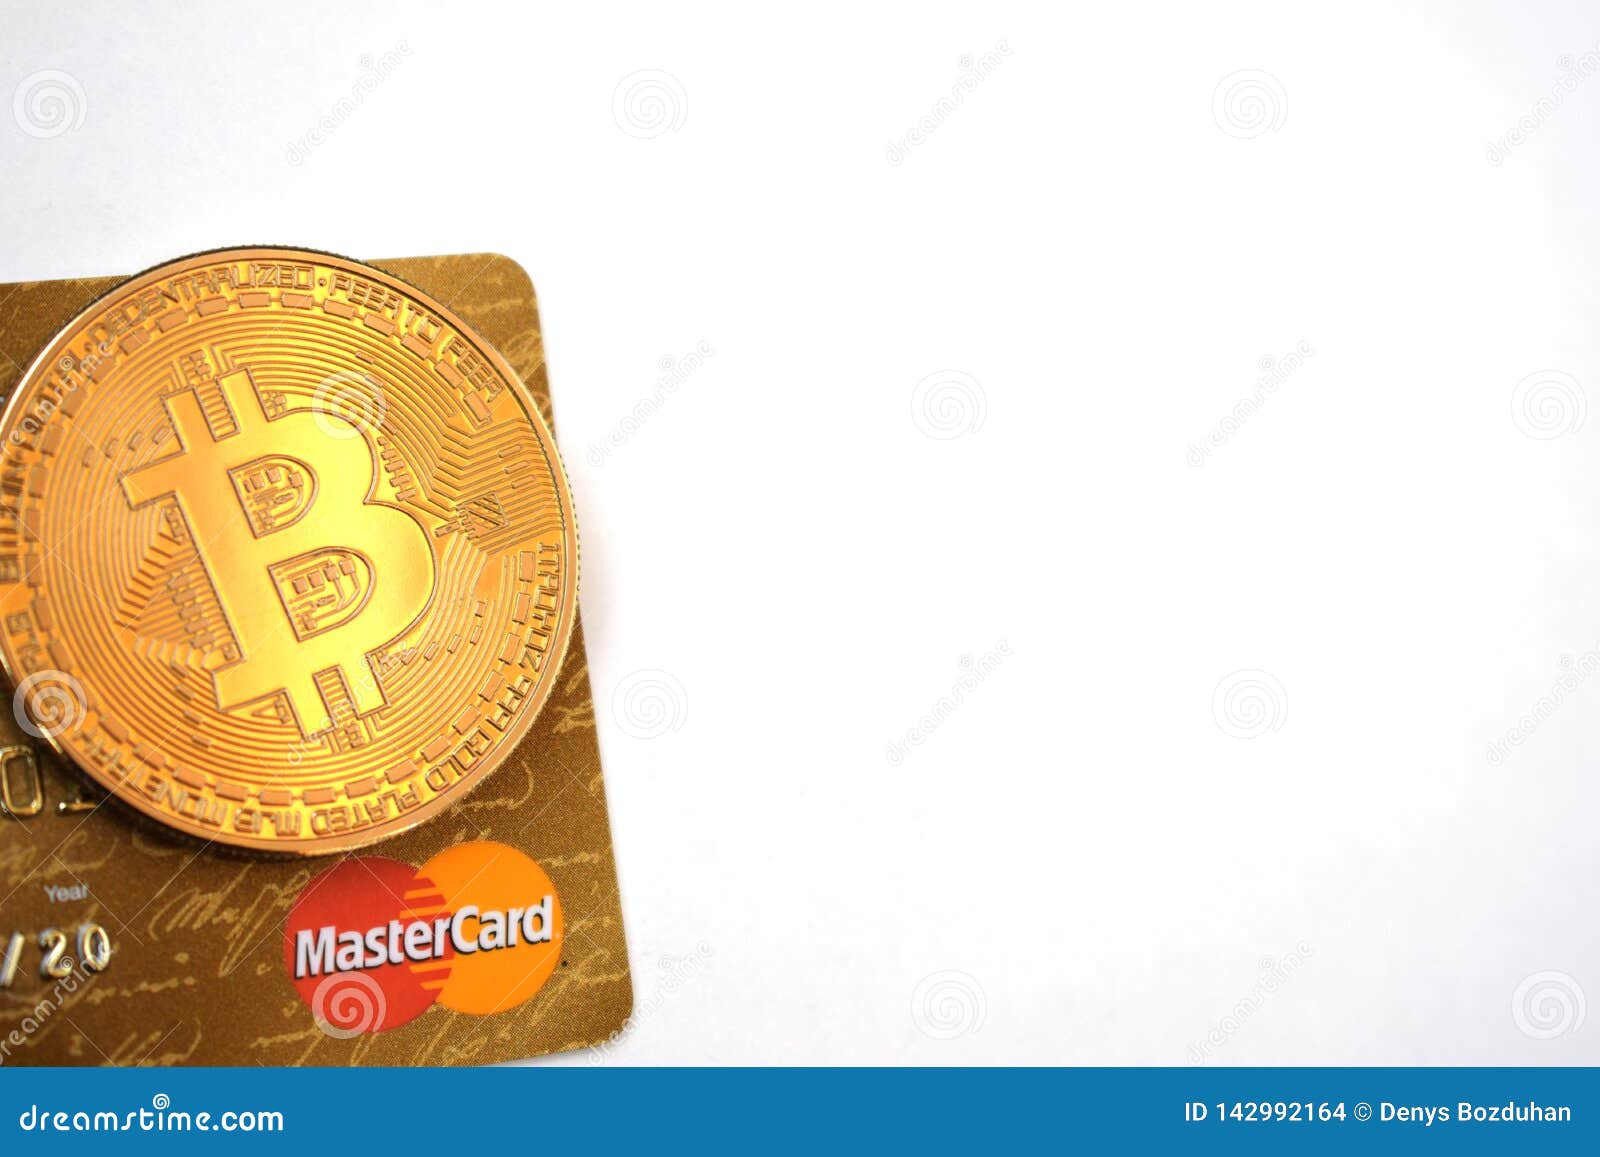 Bitcoin and MasterCard editorial stock image. Image of ...